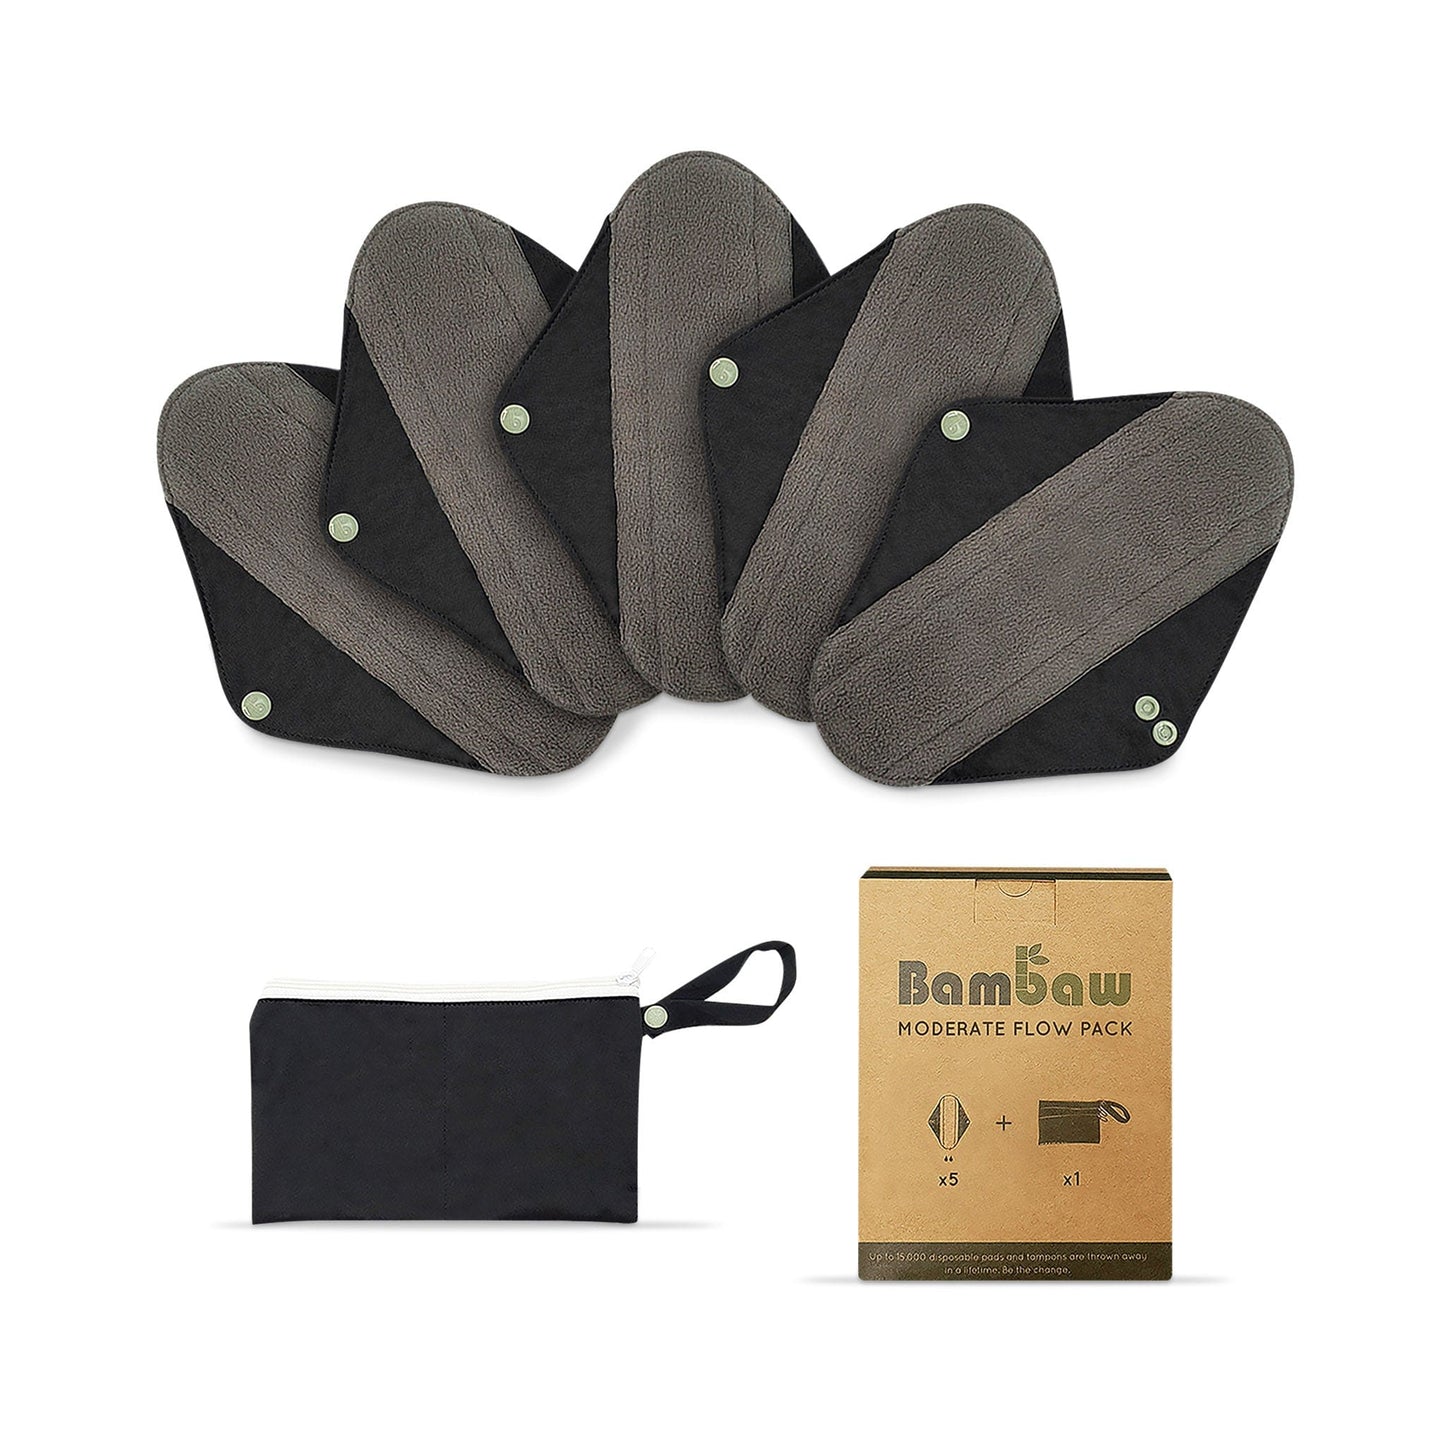 Bambaw Period Products Bamboo Charcoal Reusable Period Pads Set with Pouch - Bambaw